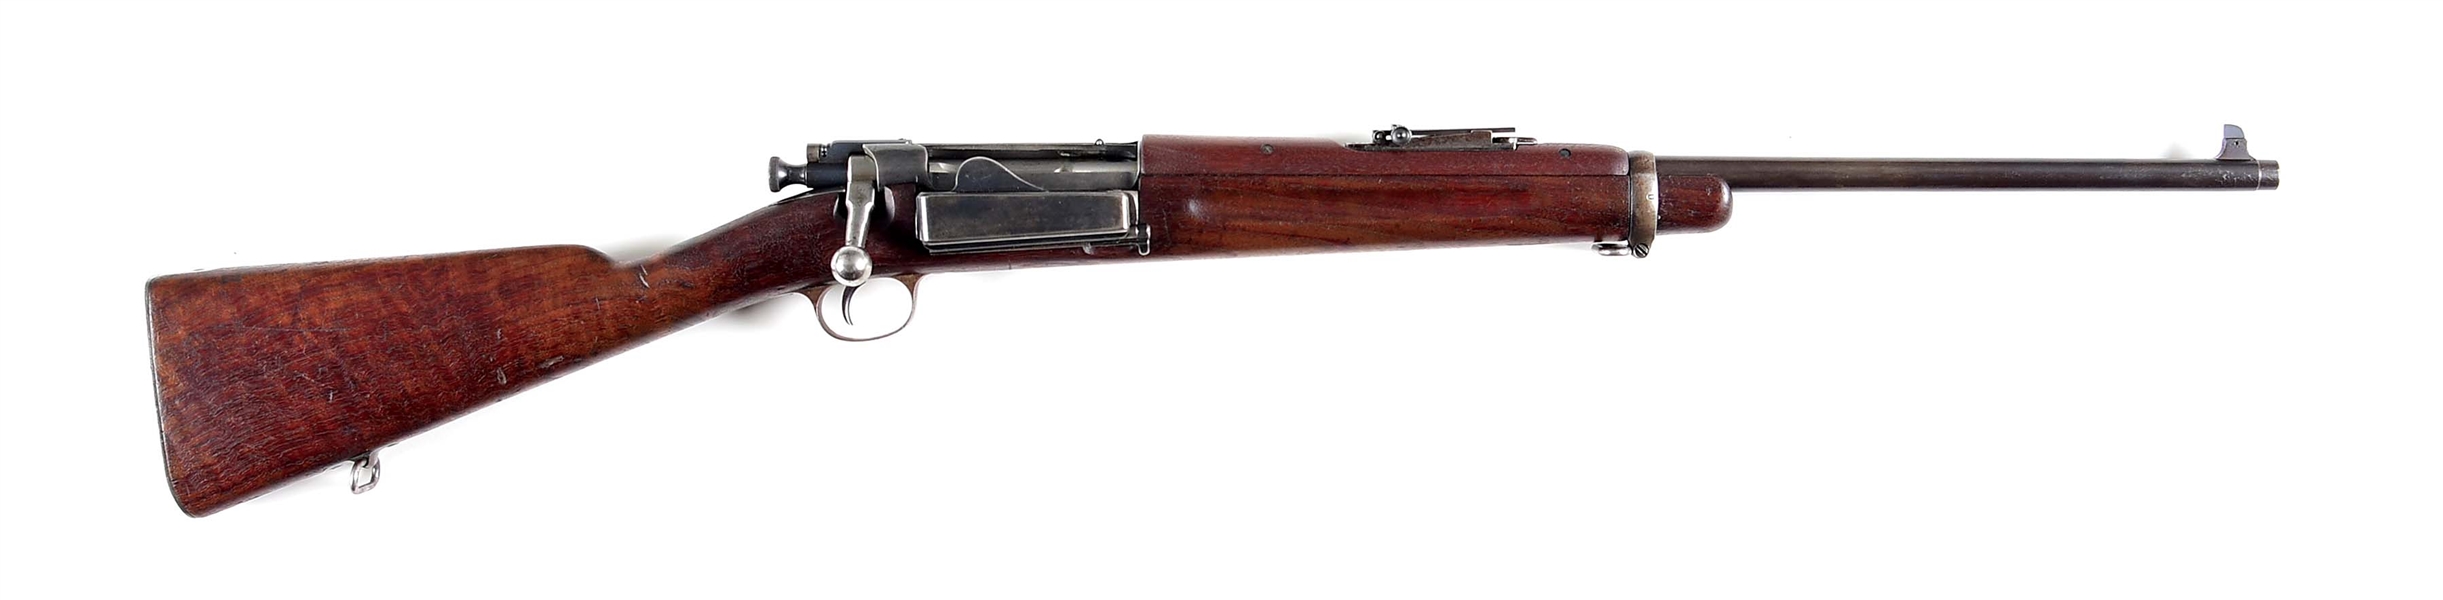 (C) LATE PRODUCTION SPRINGFIELD ARMORY MODEL 1898 KRAG BOLT ACTION RIFLE.